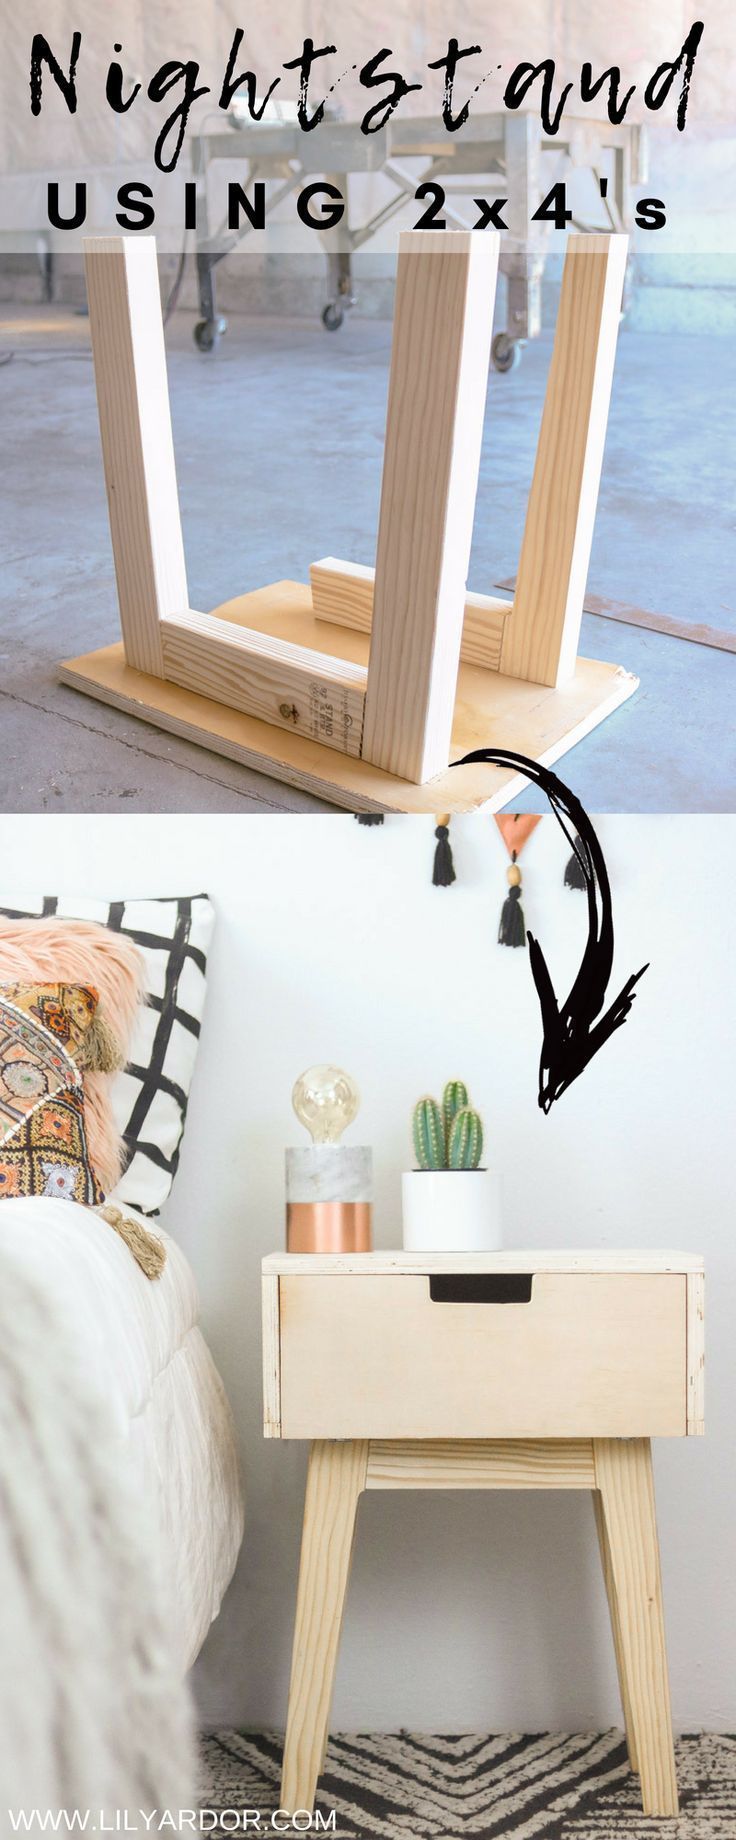 DIY NIGHTSTAND - USING 2x3's - MID-CENTURY MODERN - EASY -   17 diy projects For Guys home decor ideas